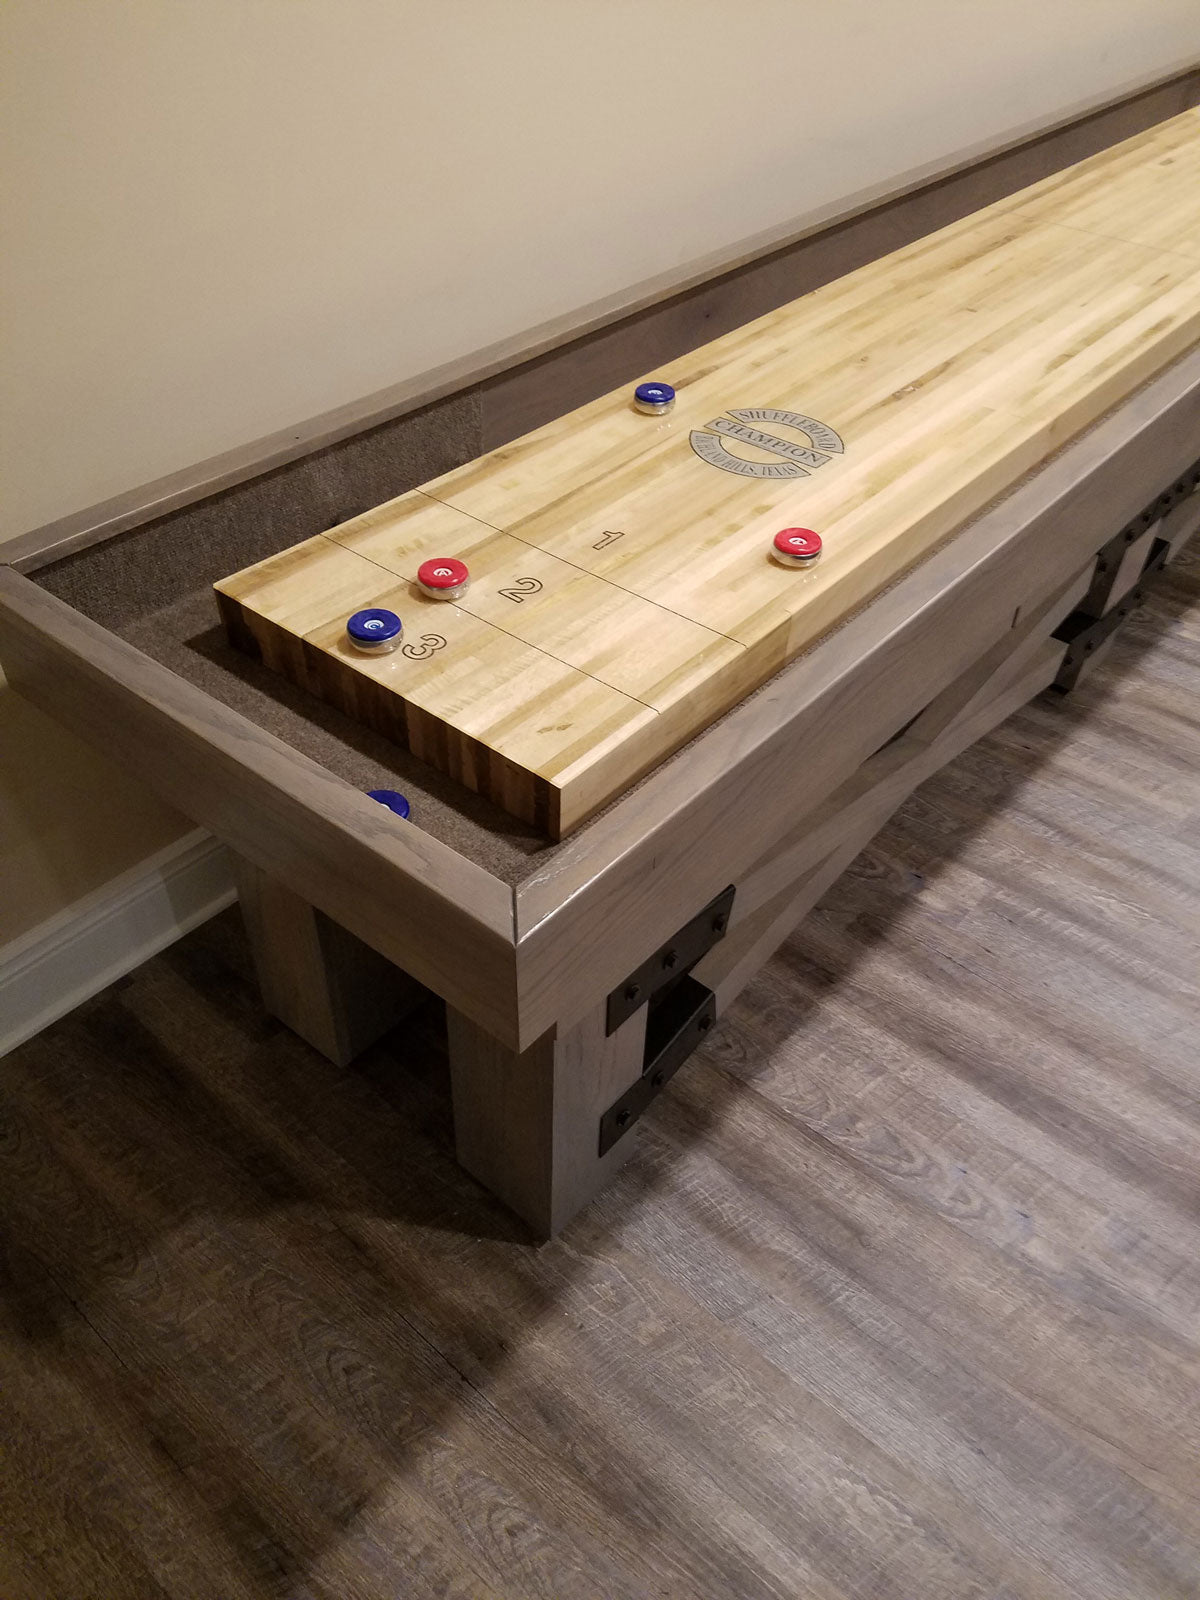 Will this silicone spray work? Don't have time to order Sun-Glo : r/ shuffleboard